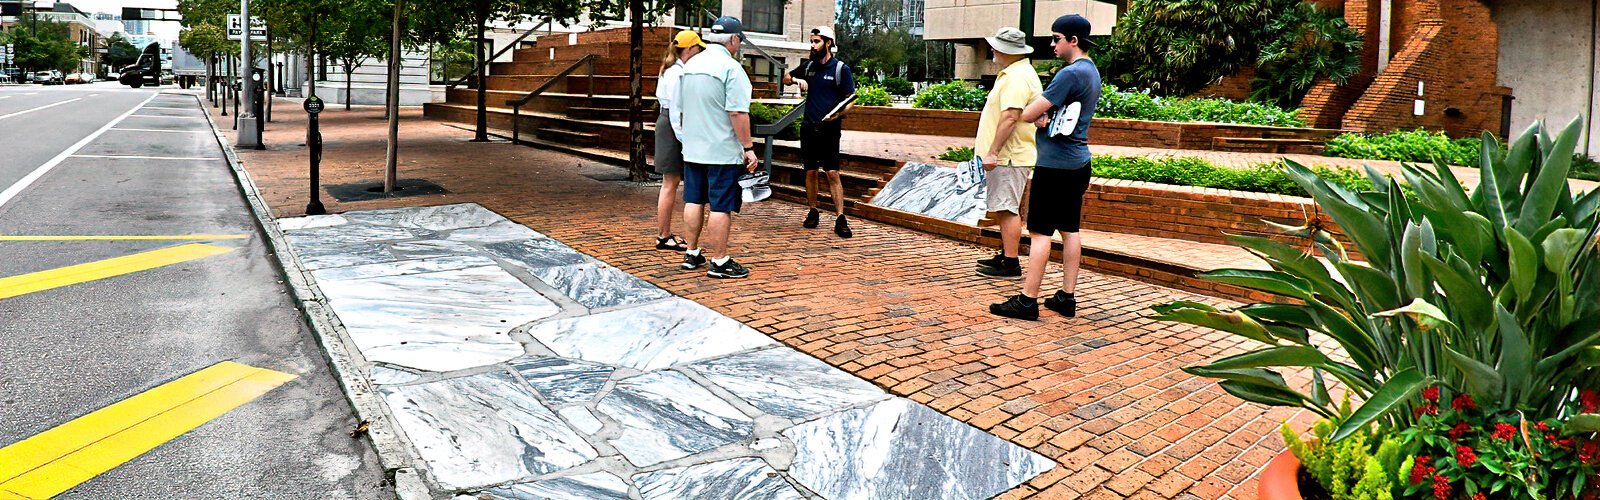 – A  Tampa Bay History Center walking tour of downtown Tampa brings participants to the remnants of Tampa’s first paved sidewalk on Lafayette Street, now East John F. Kennedy Boulevard. The sidewalk was built from Georgia marble in 1888.